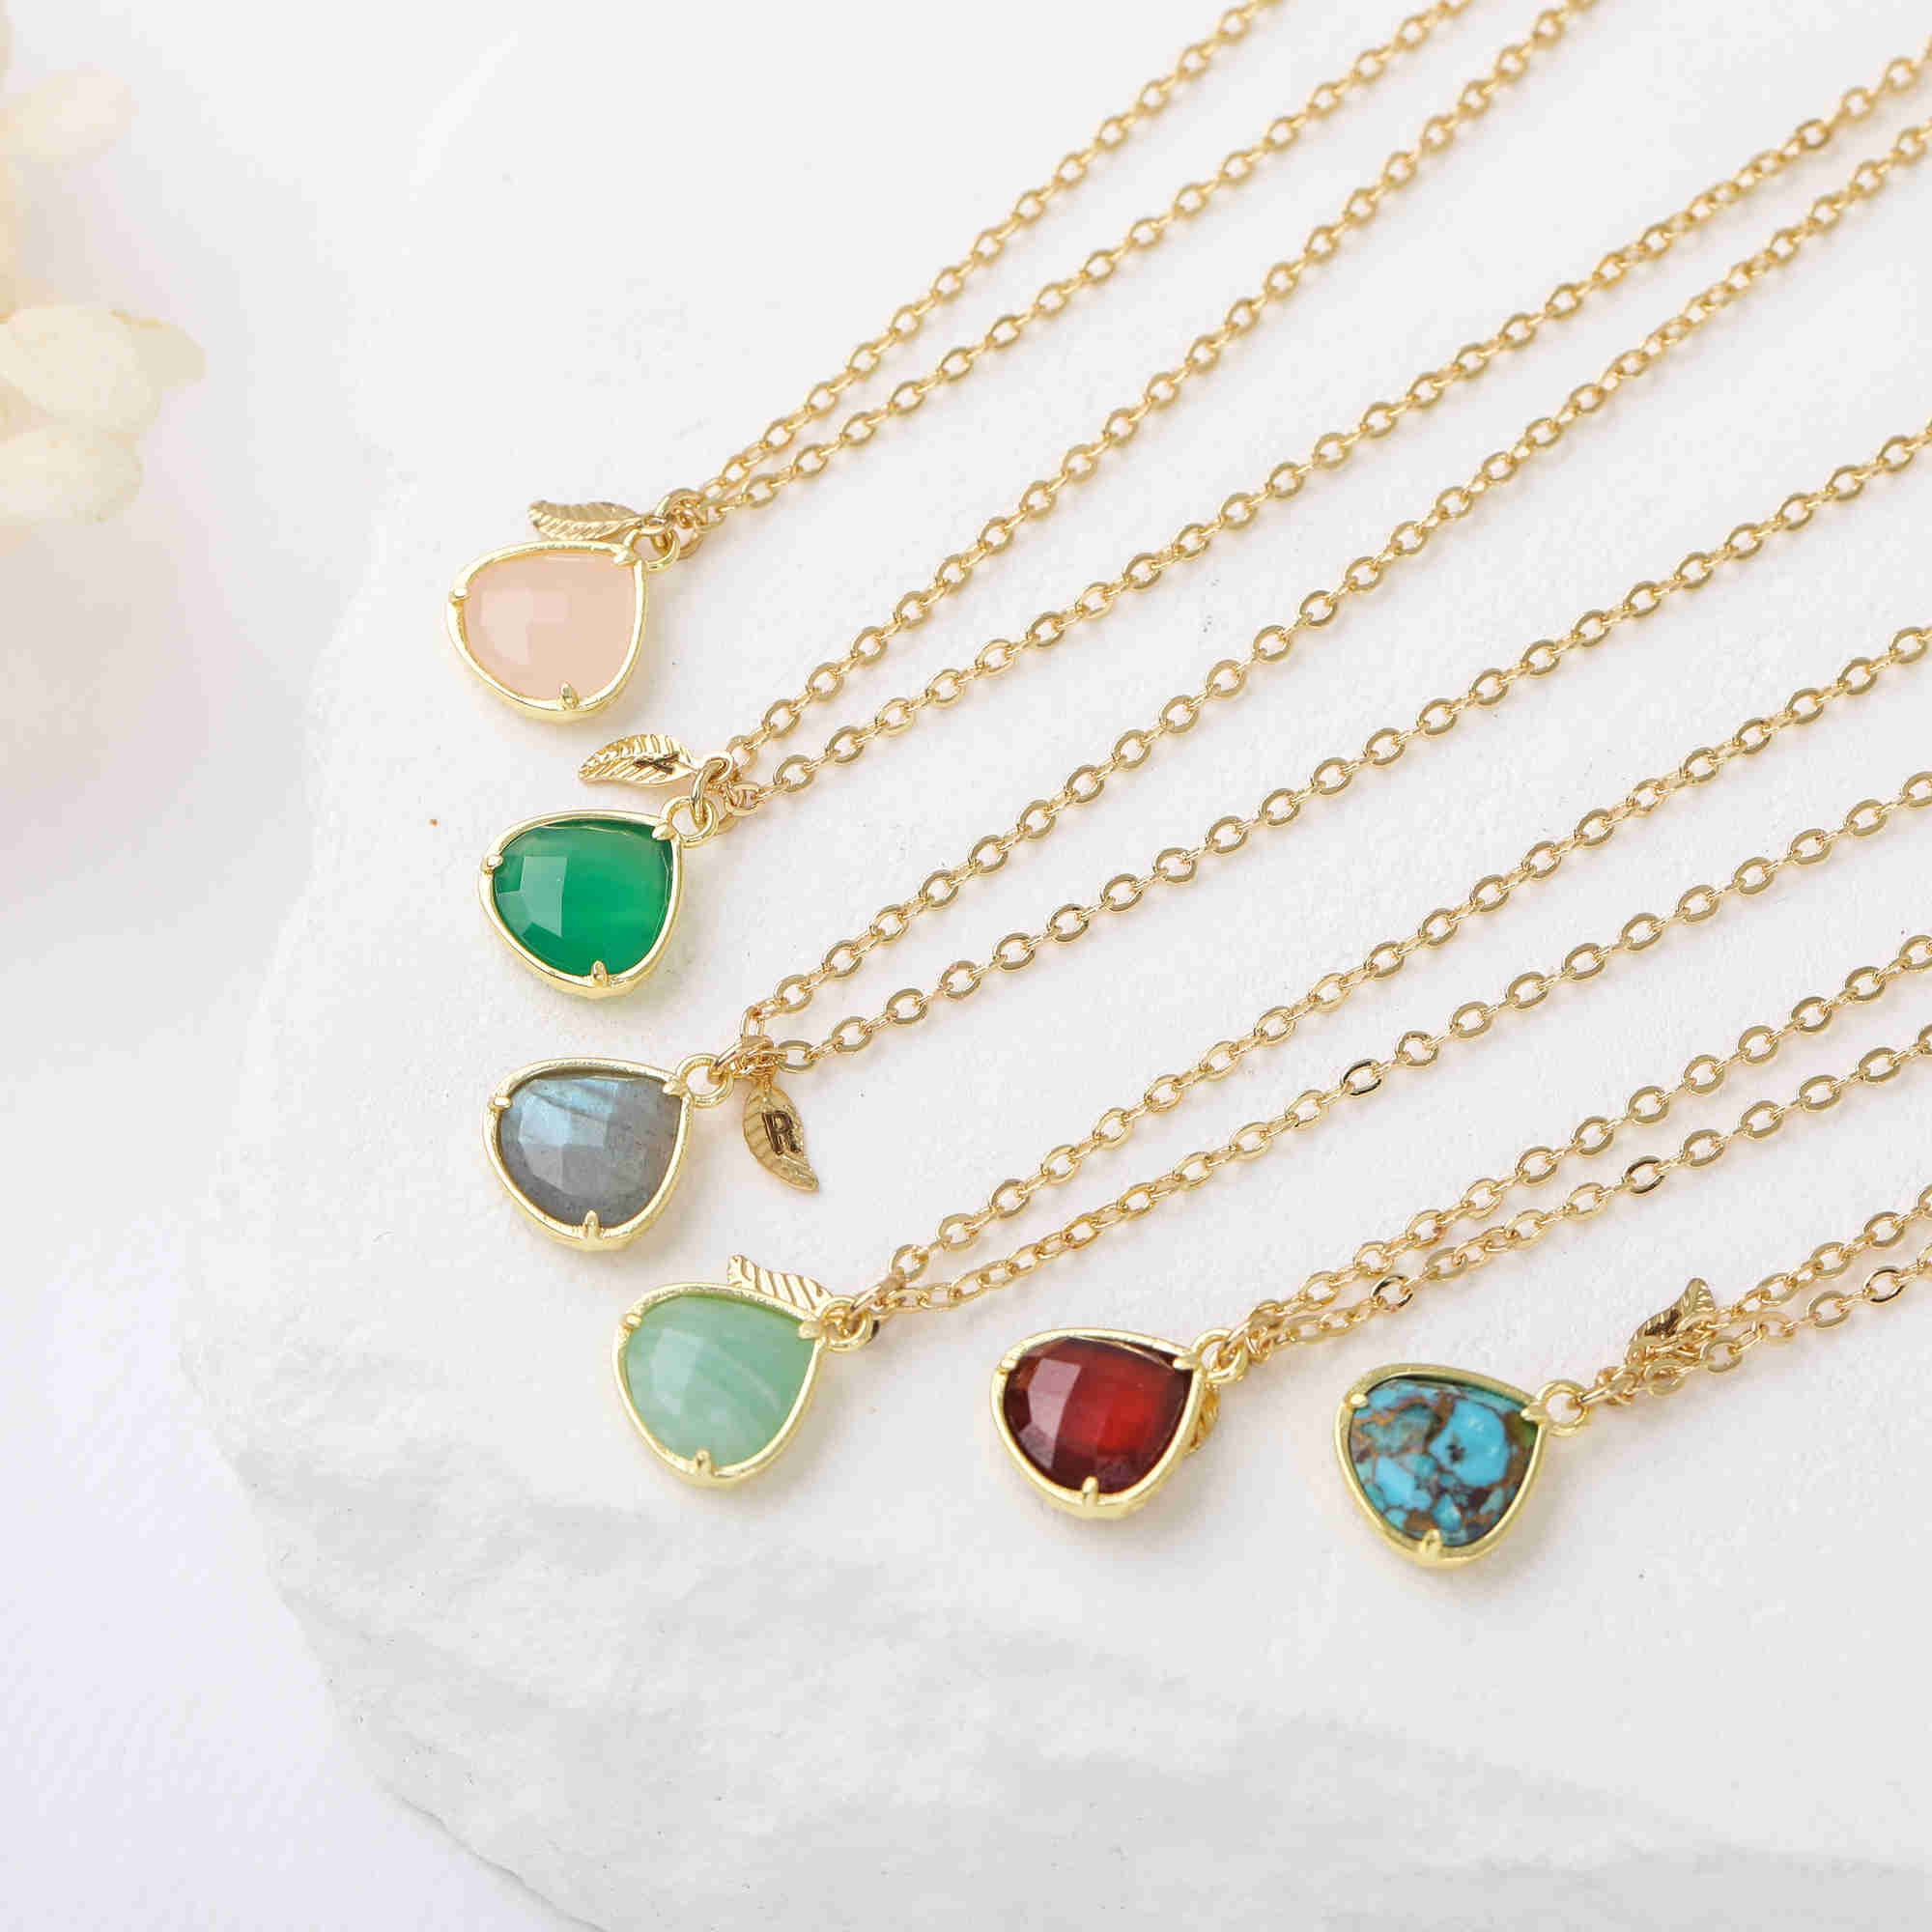 16" Teardrop Gold Plated Natural Gemstone Necklace, Faceted Quartz, Healing Crystal Stone Necklace, Birthstone Jewelry, Wholesale BT020